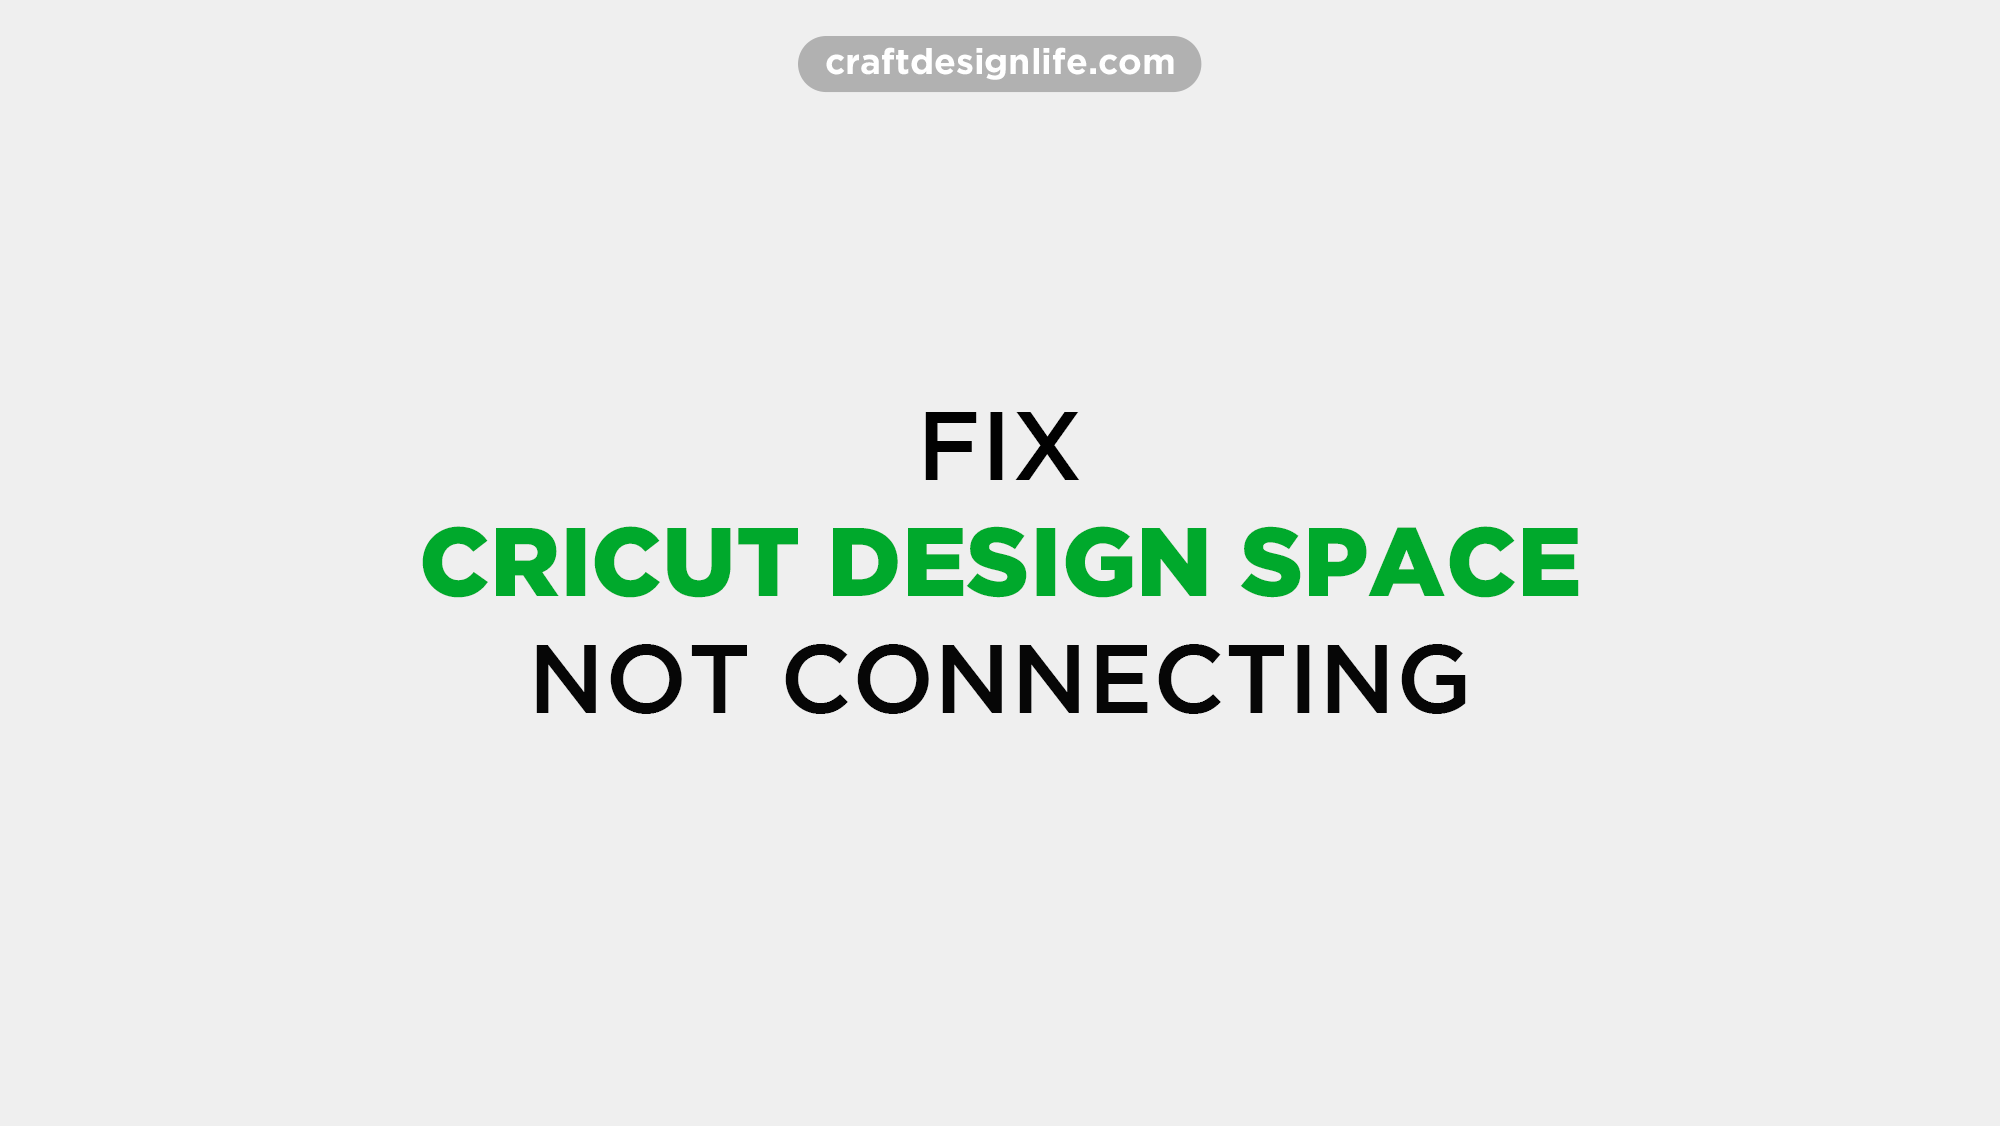 How To Fix Cricut Design Space Not Connecting